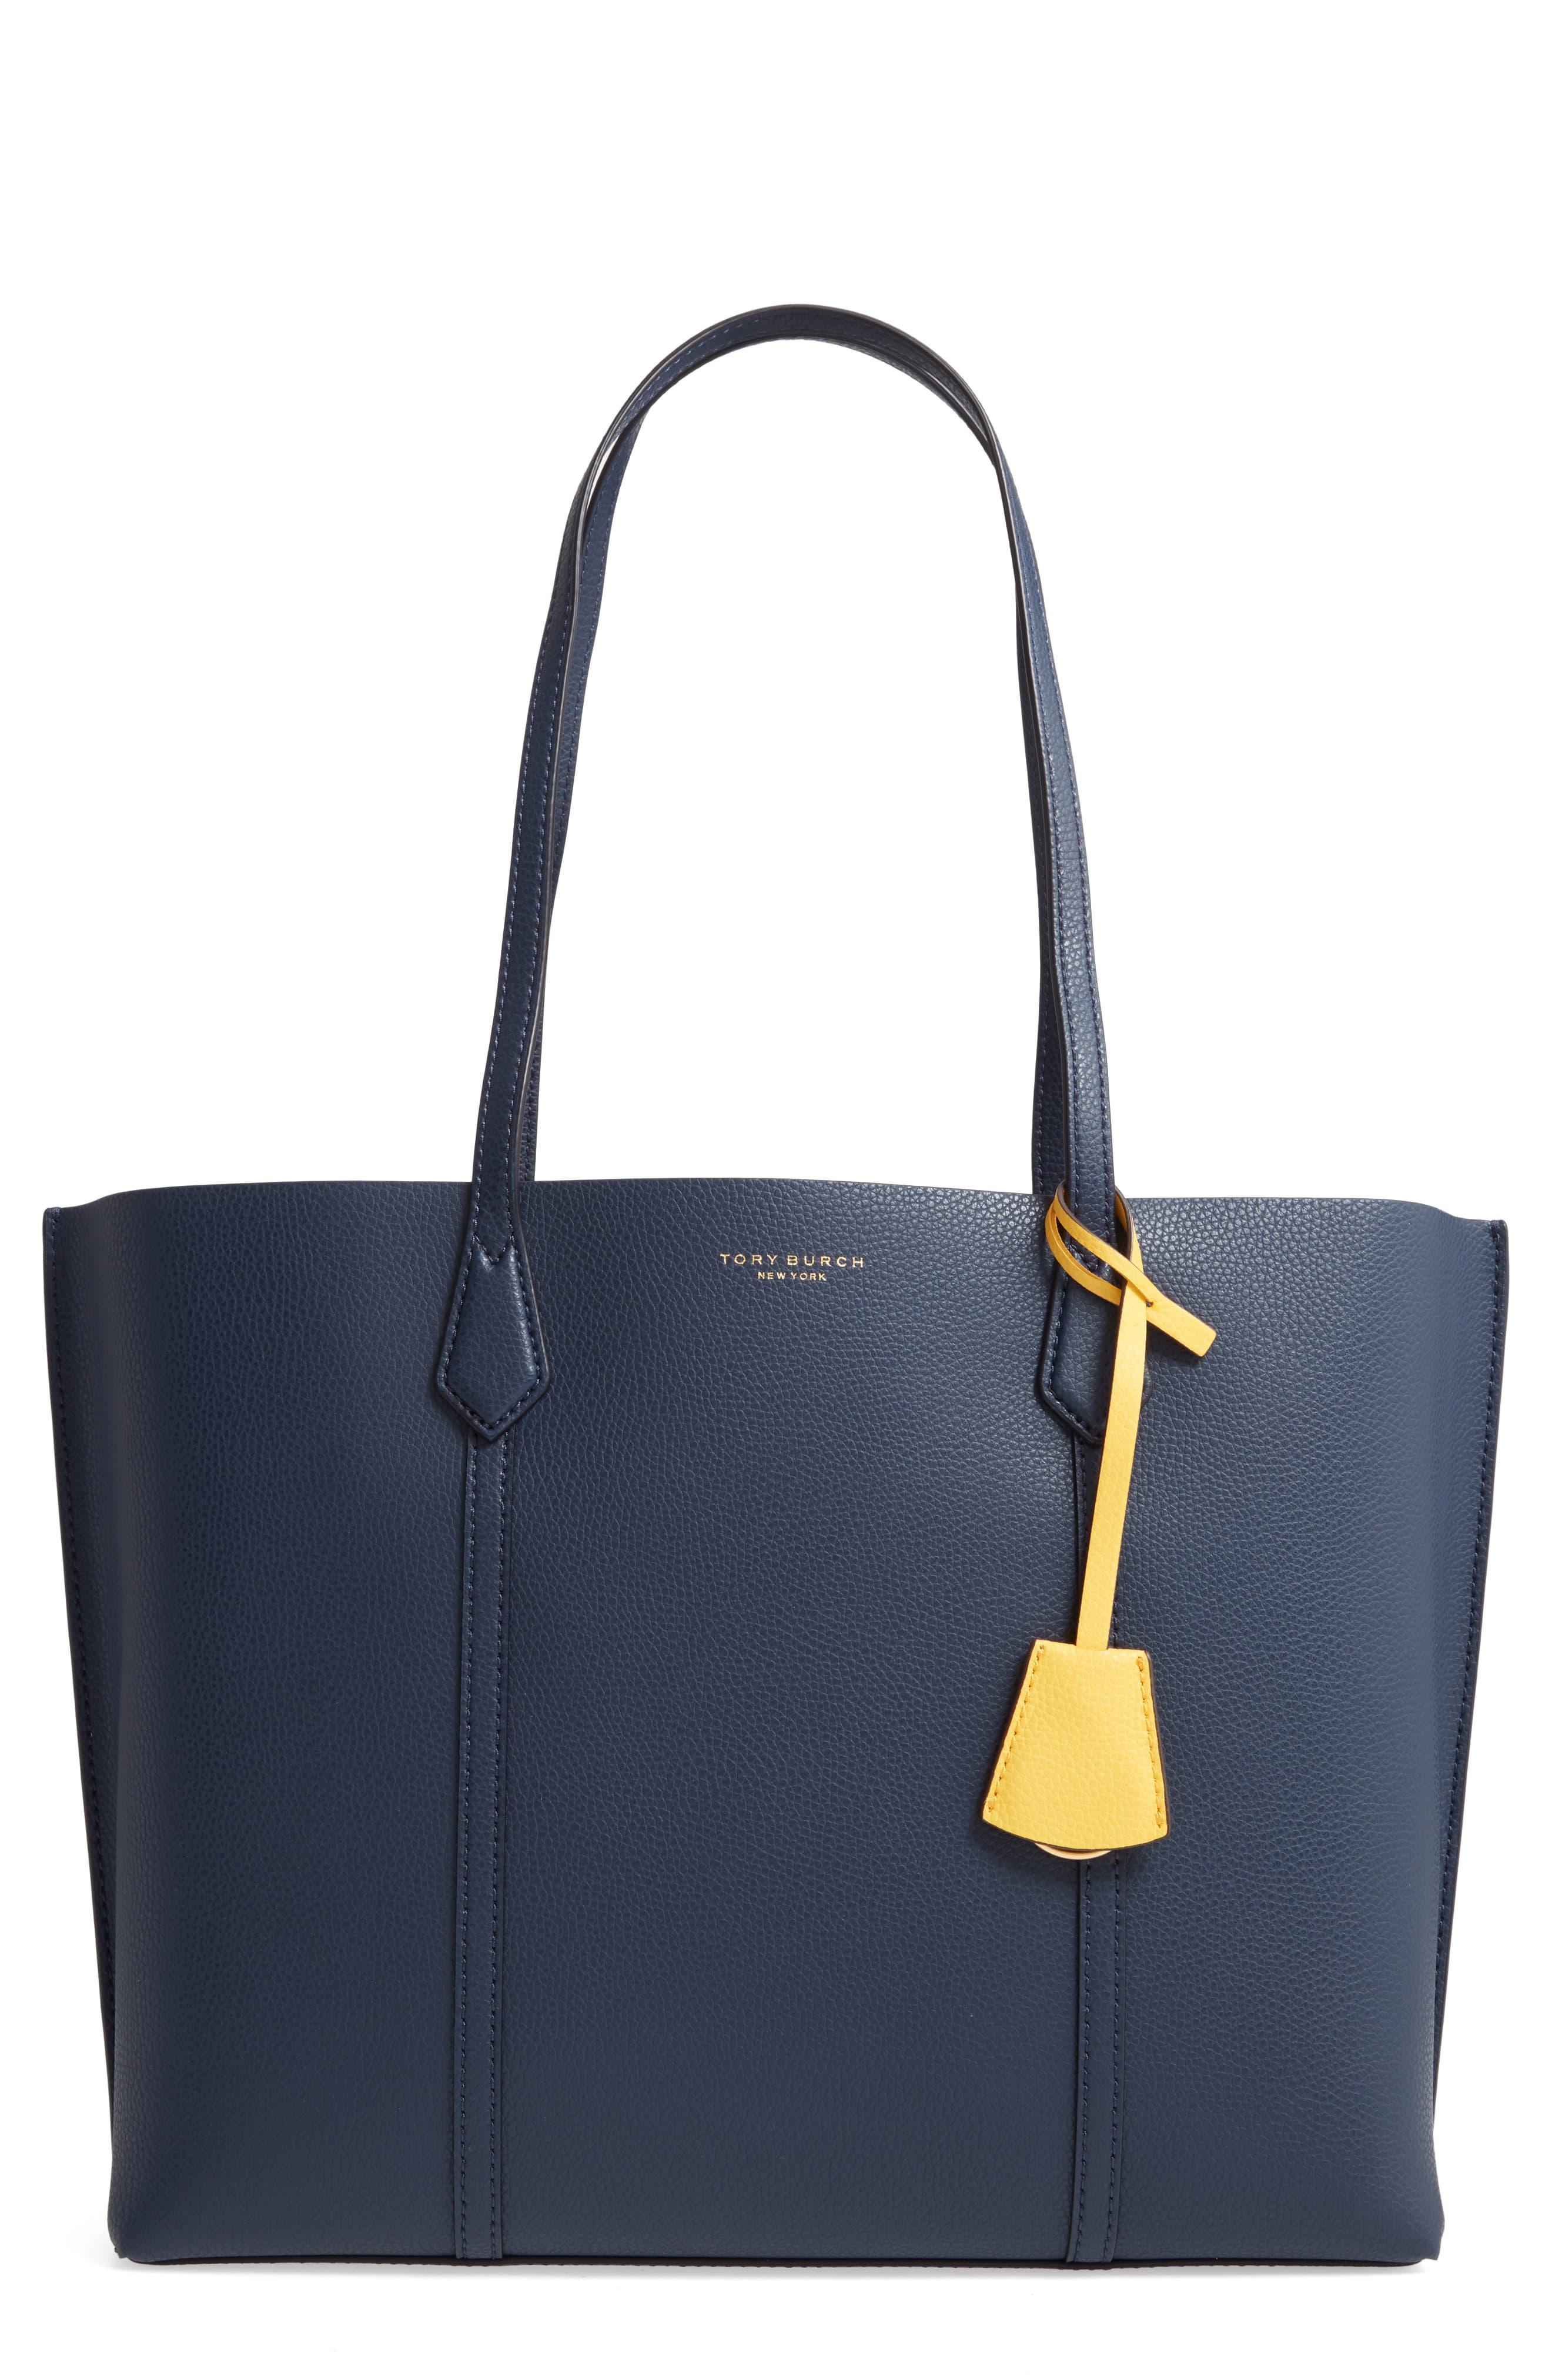 Tory Burch Leather Perry Triple-compartment Tote in Navy (Blue) - Lyst